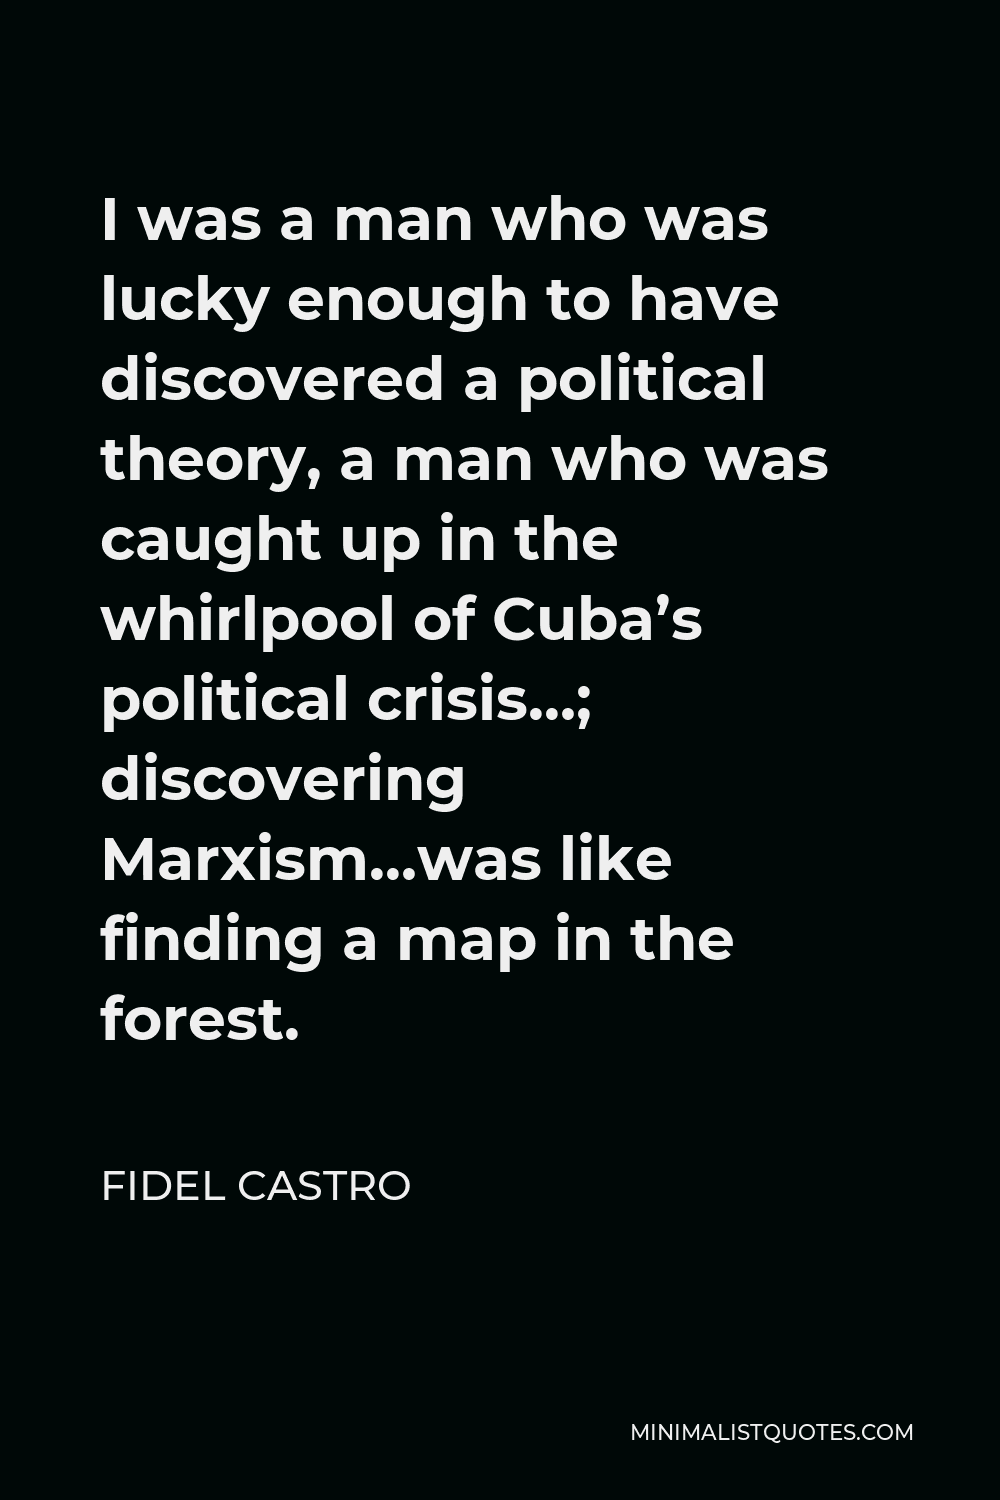 Fidel Castro Quote - I was a man who was lucky enough to have discovered a political theory, a man who was caught up in the whirlpool of Cuba’s political crisis…; discovering Marxism…was like finding a map in the forest.